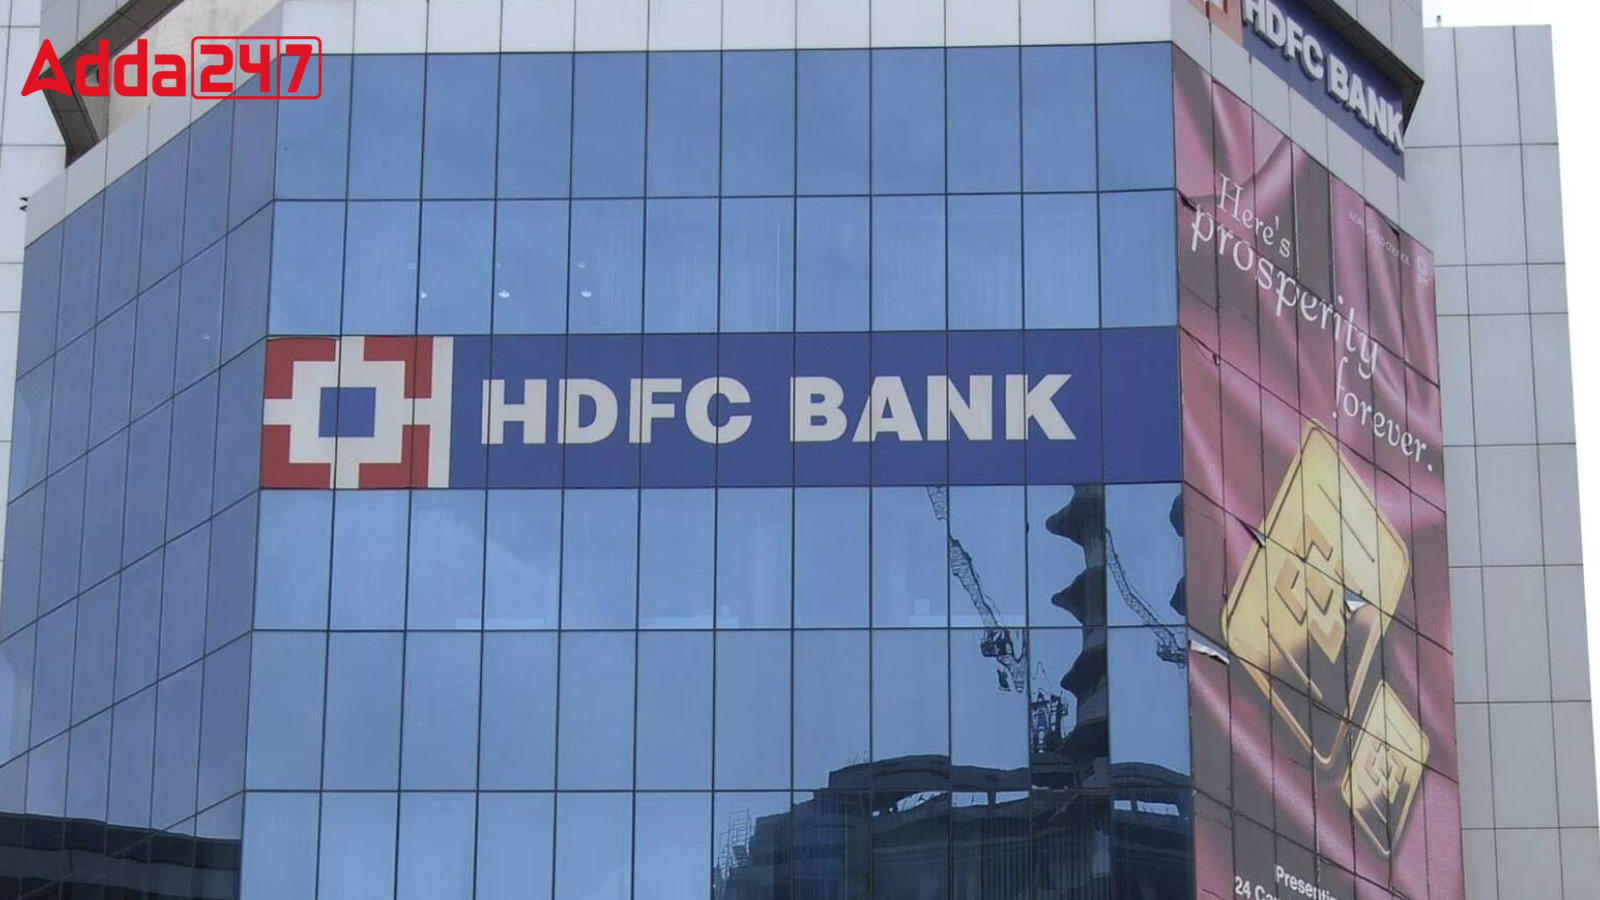 HDFC Bank Leads Profitability Rankings From April To December